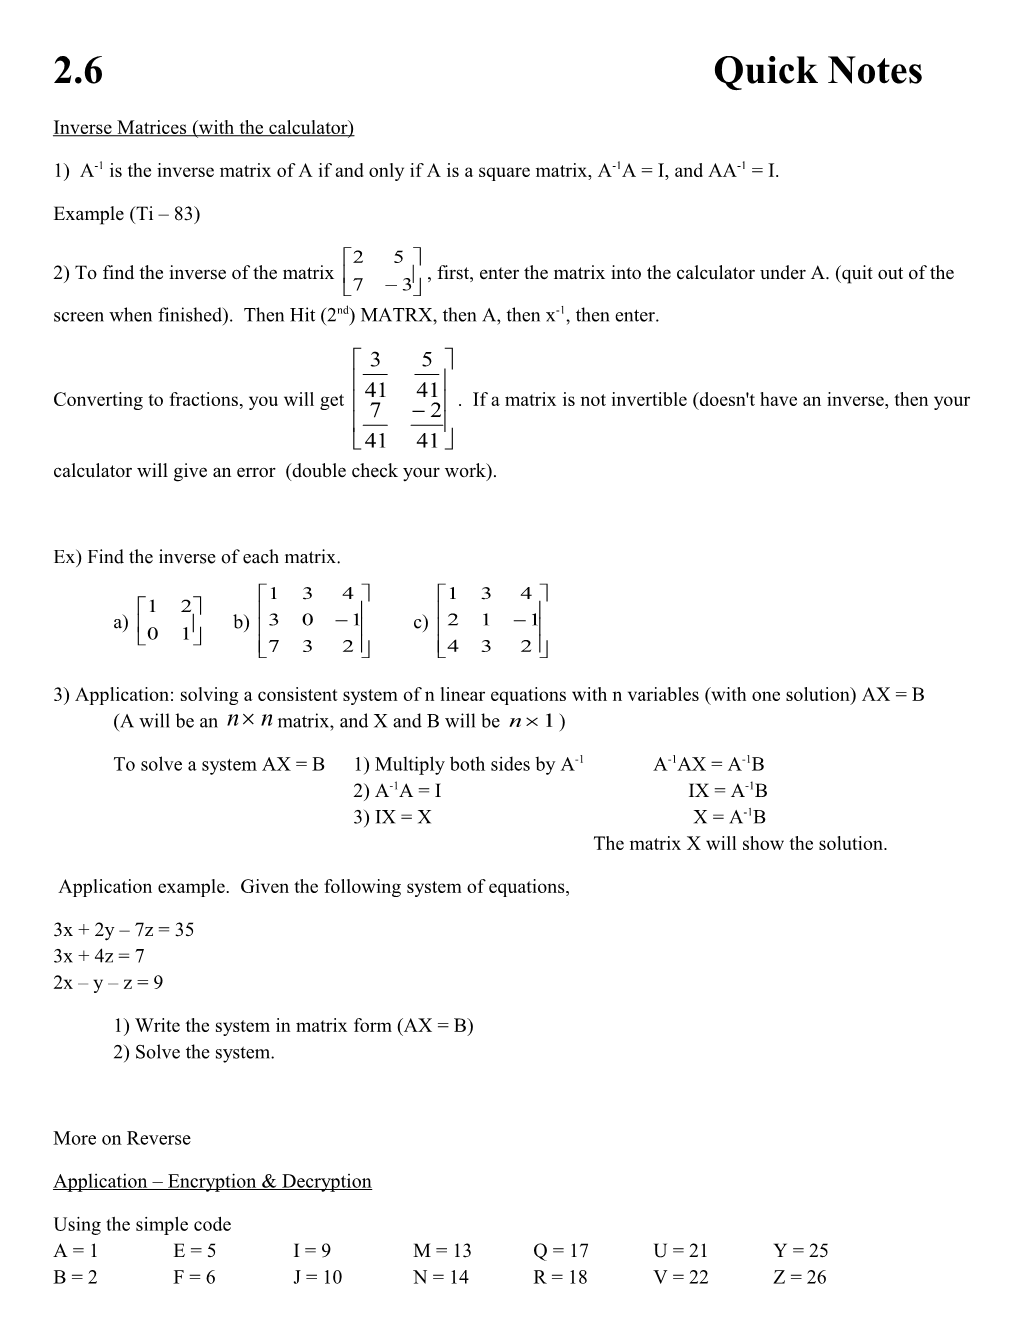 Inverse Matrices (With the Calculator)